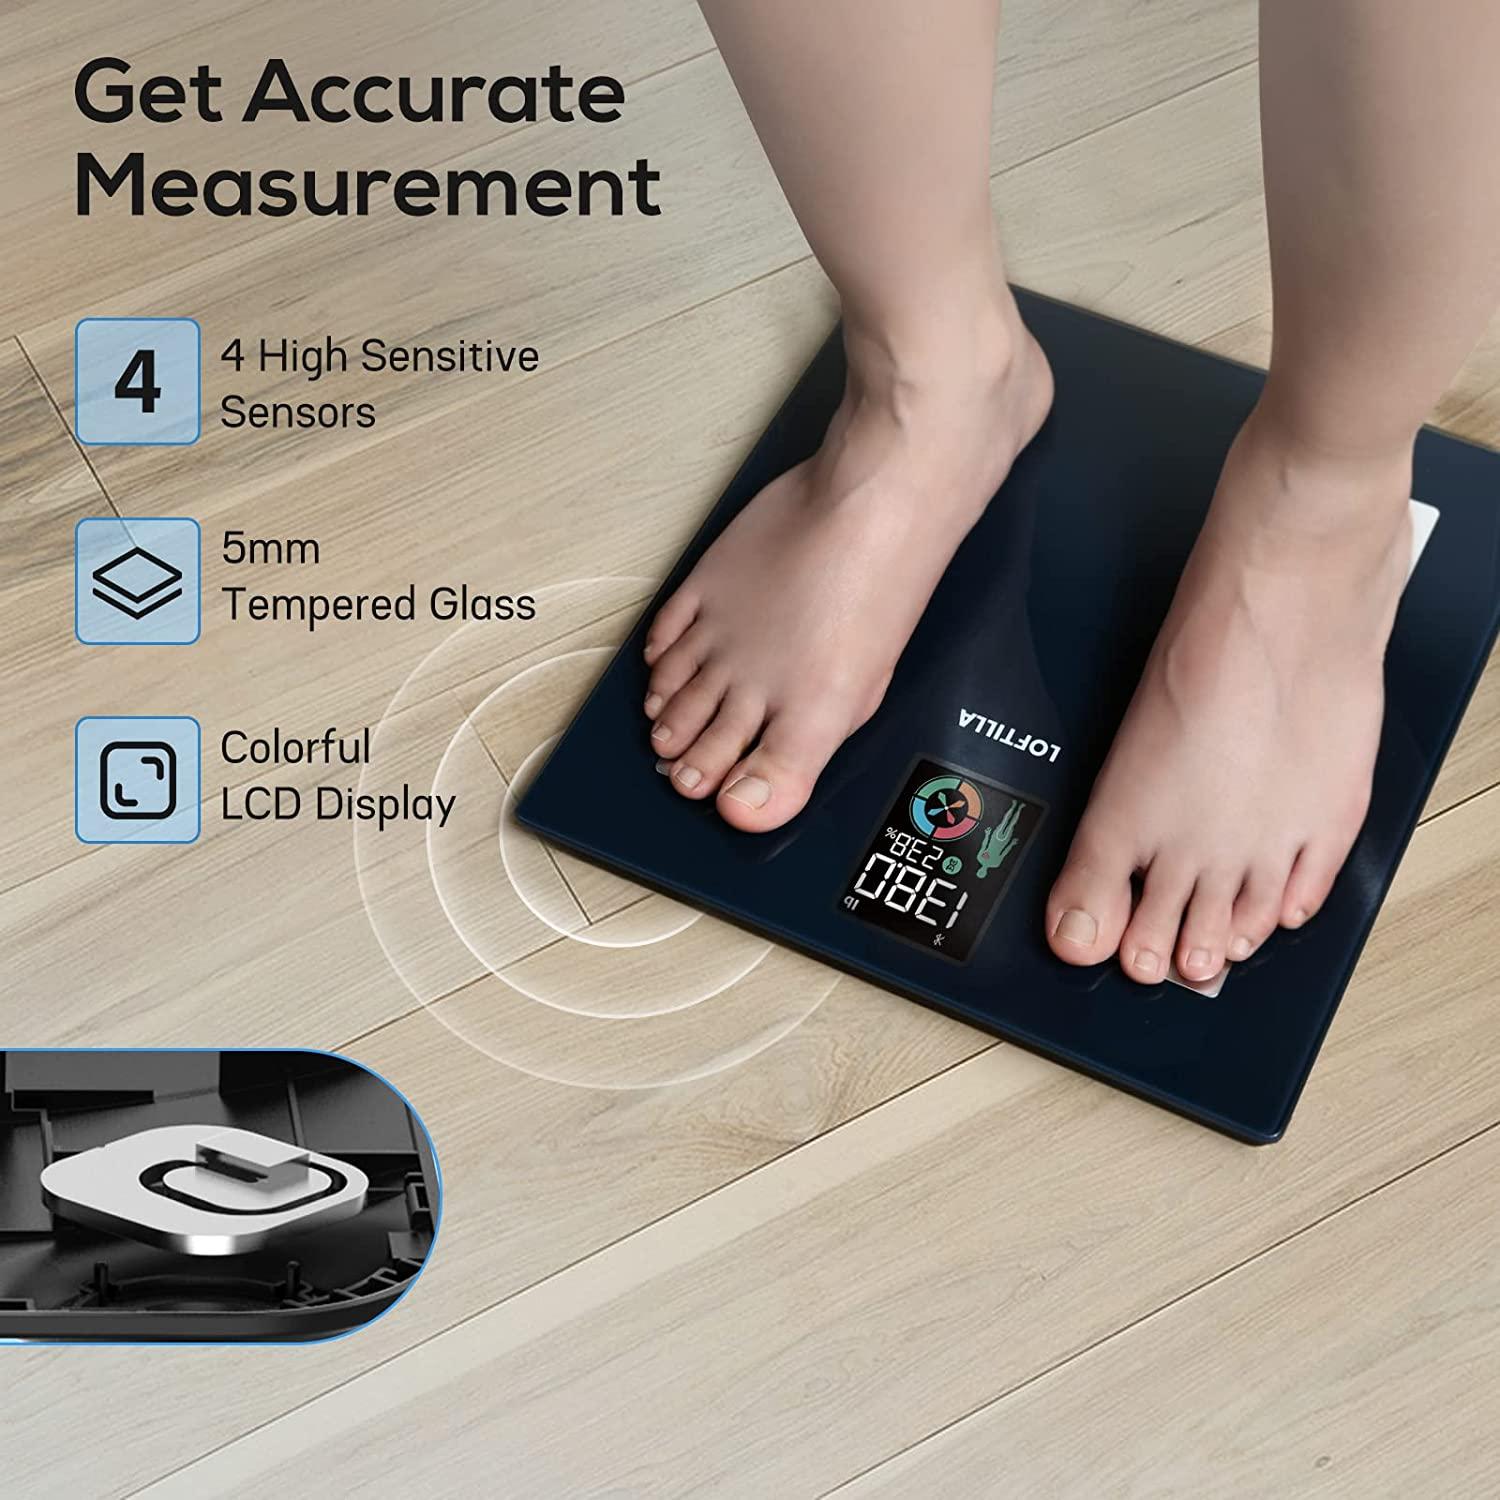 LOFTILLA Scale for Body Weight and BMI, Weight Scales, Digital